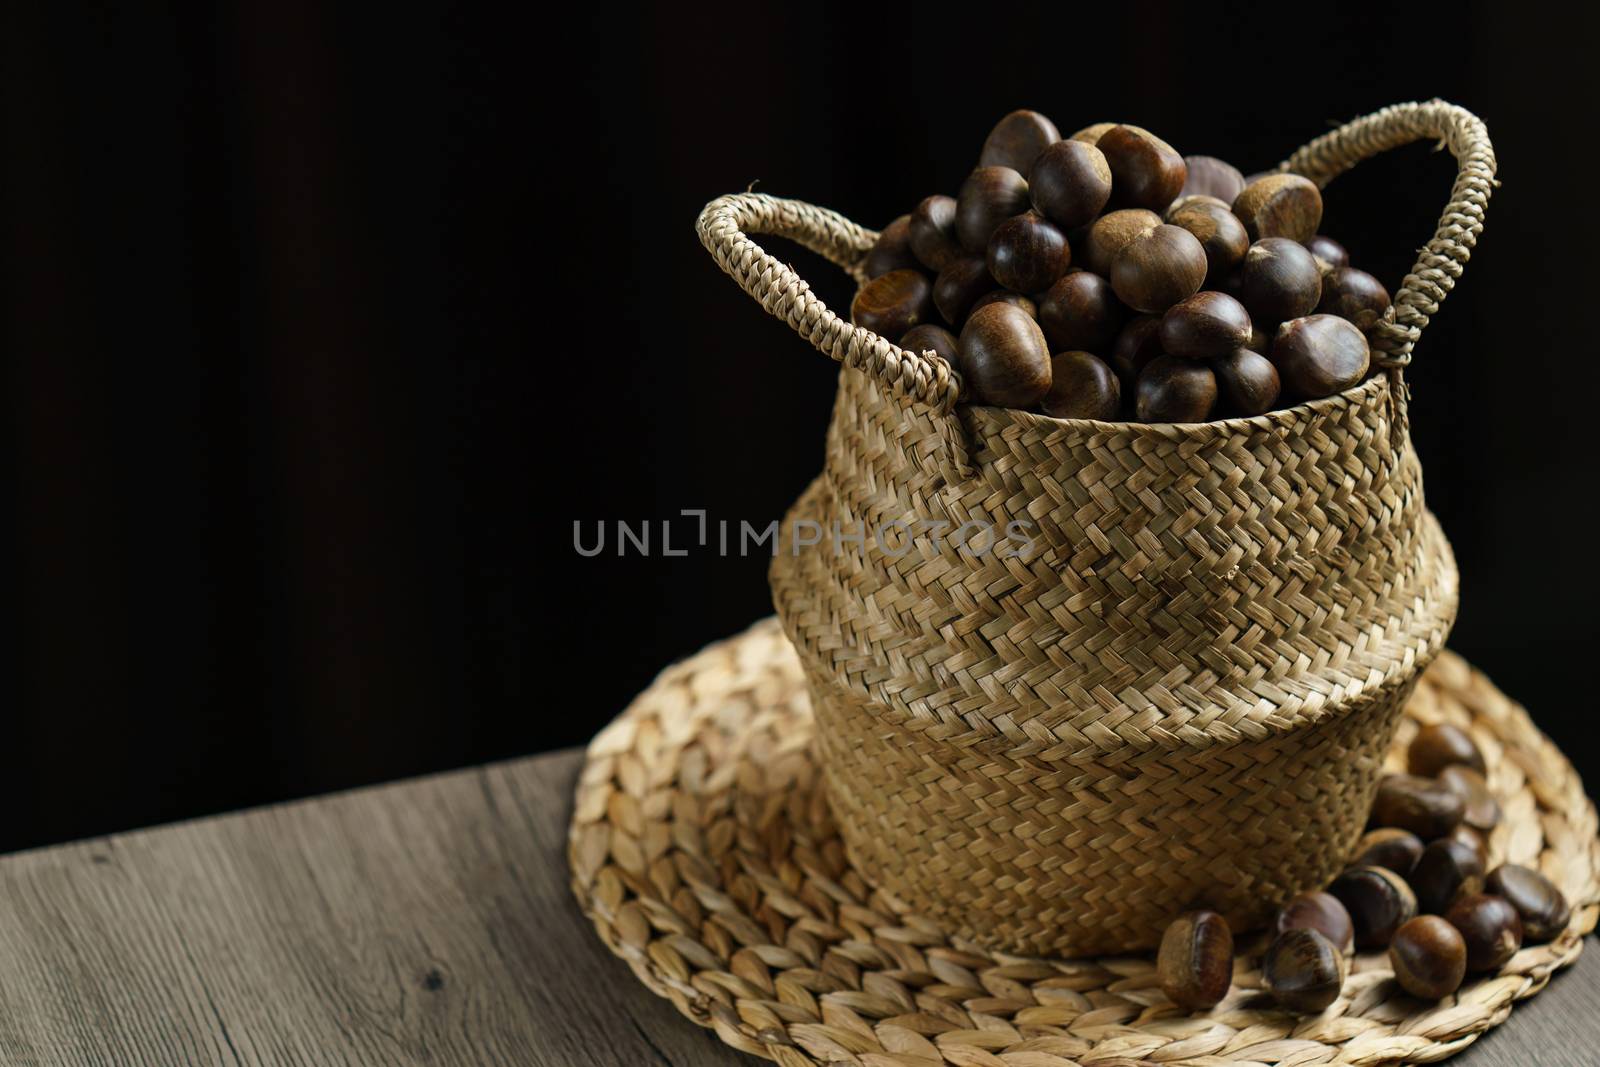 Close-up of wicker basket with full of chestnuts.